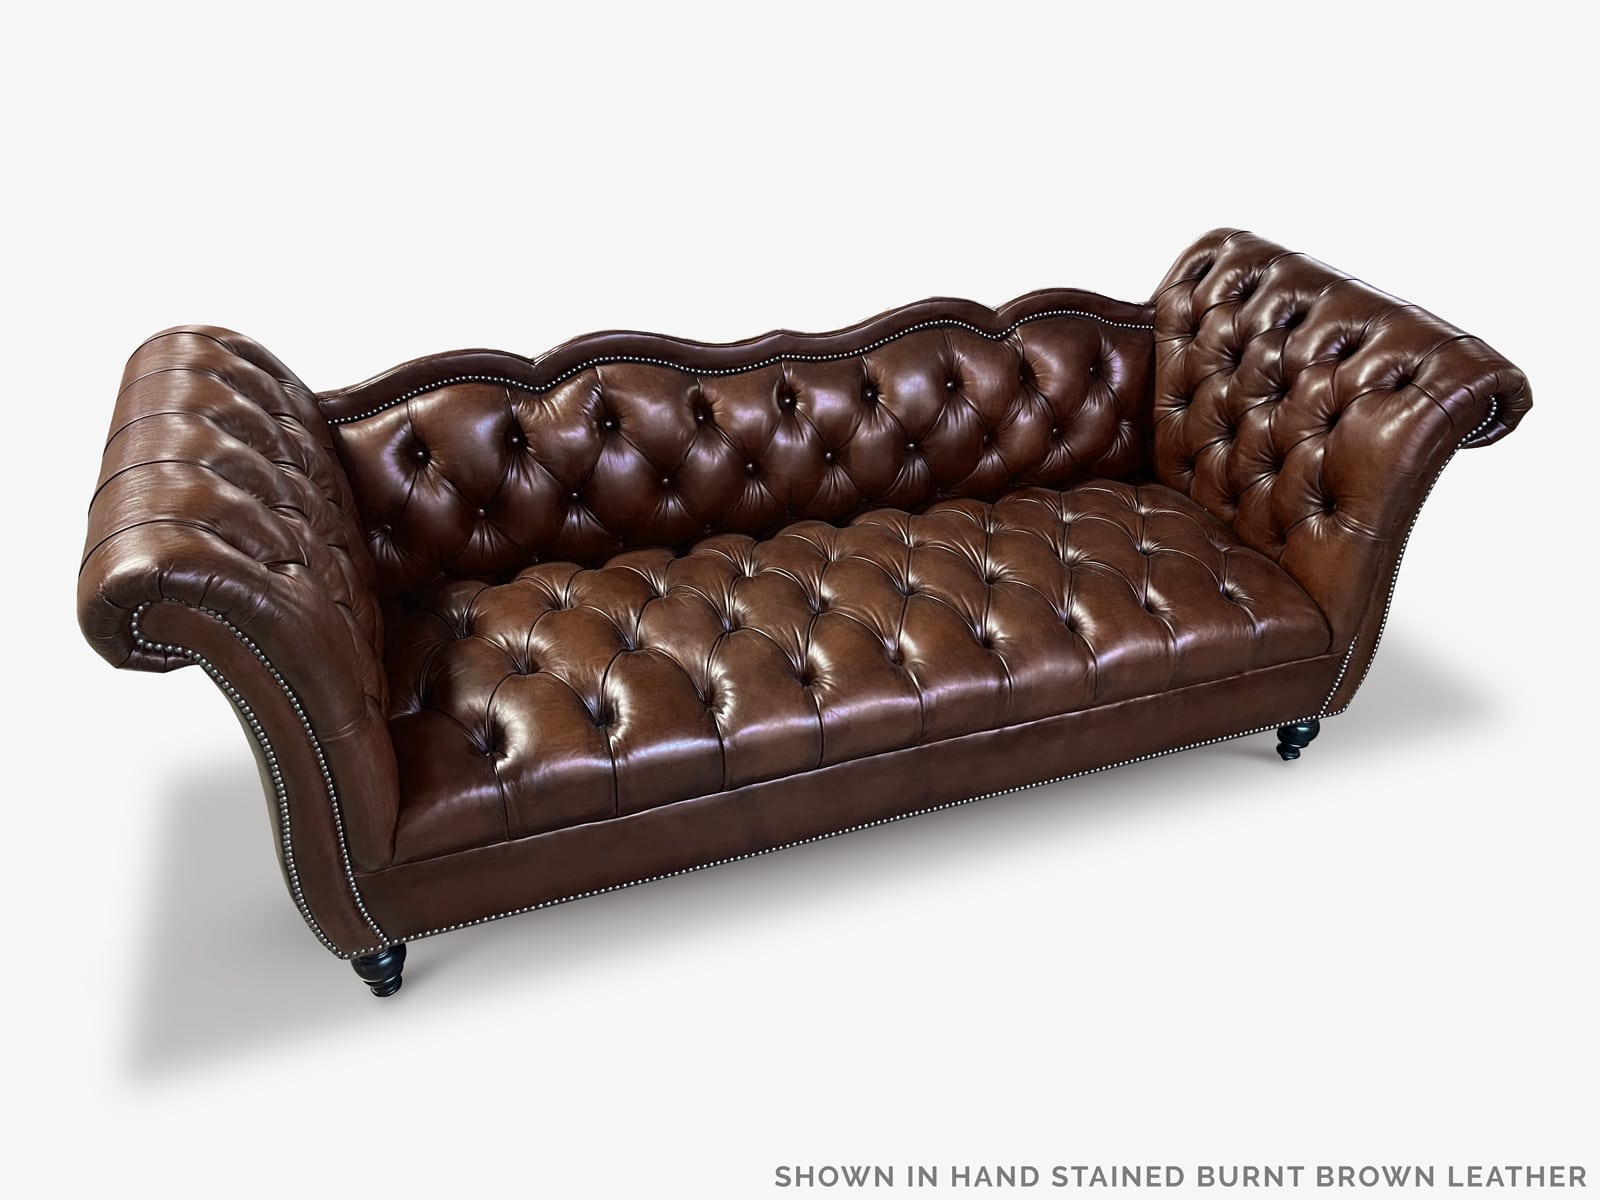 The Collins Custom Built Vintage Hand-Stained Burnt Brown Chesterfield Sofa